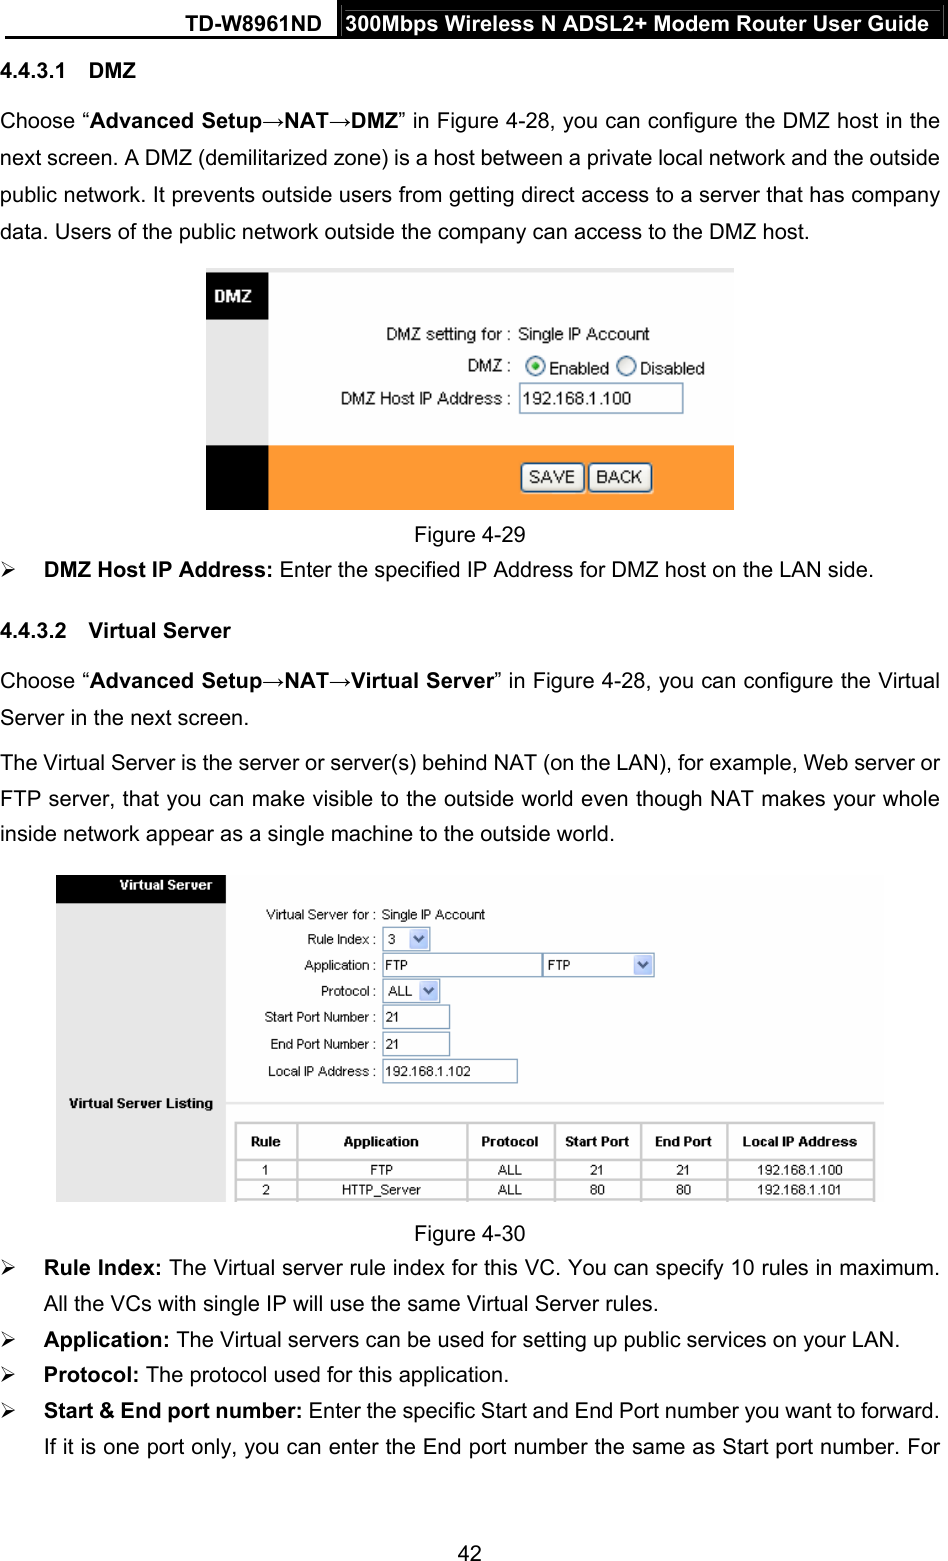 TD-W8961ND  300Mbps Wireless N ADSL2+ Modem Router User Guide  424.4.3.1  DMZ Choose “Advanced Setup→NAT→DMZ” in Figure 4-28, you can configure the DMZ host in the next screen. A DMZ (demilitarized zone) is a host between a private local network and the outside public network. It prevents outside users from getting direct access to a server that has company data. Users of the public network outside the company can access to the DMZ host.  Figure 4-29 ¾ DMZ Host IP Address: Enter the specified IP Address for DMZ host on the LAN side. 4.4.3.2  Virtual Server Choose “Advanced Setup→NAT→Virtual Server” in Figure 4-28, you can configure the Virtual Server in the next screen.   The Virtual Server is the server or server(s) behind NAT (on the LAN), for example, Web server or FTP server, that you can make visible to the outside world even though NAT makes your whole inside network appear as a single machine to the outside world.  Figure 4-30 ¾ Rule Index: The Virtual server rule index for this VC. You can specify 10 rules in maximum. All the VCs with single IP will use the same Virtual Server rules. ¾ Application: The Virtual servers can be used for setting up public services on your LAN. ¾ Protocol: The protocol used for this application. ¾ Start &amp; End port number: Enter the specific Start and End Port number you want to forward. If it is one port only, you can enter the End port number the same as Start port number. For 